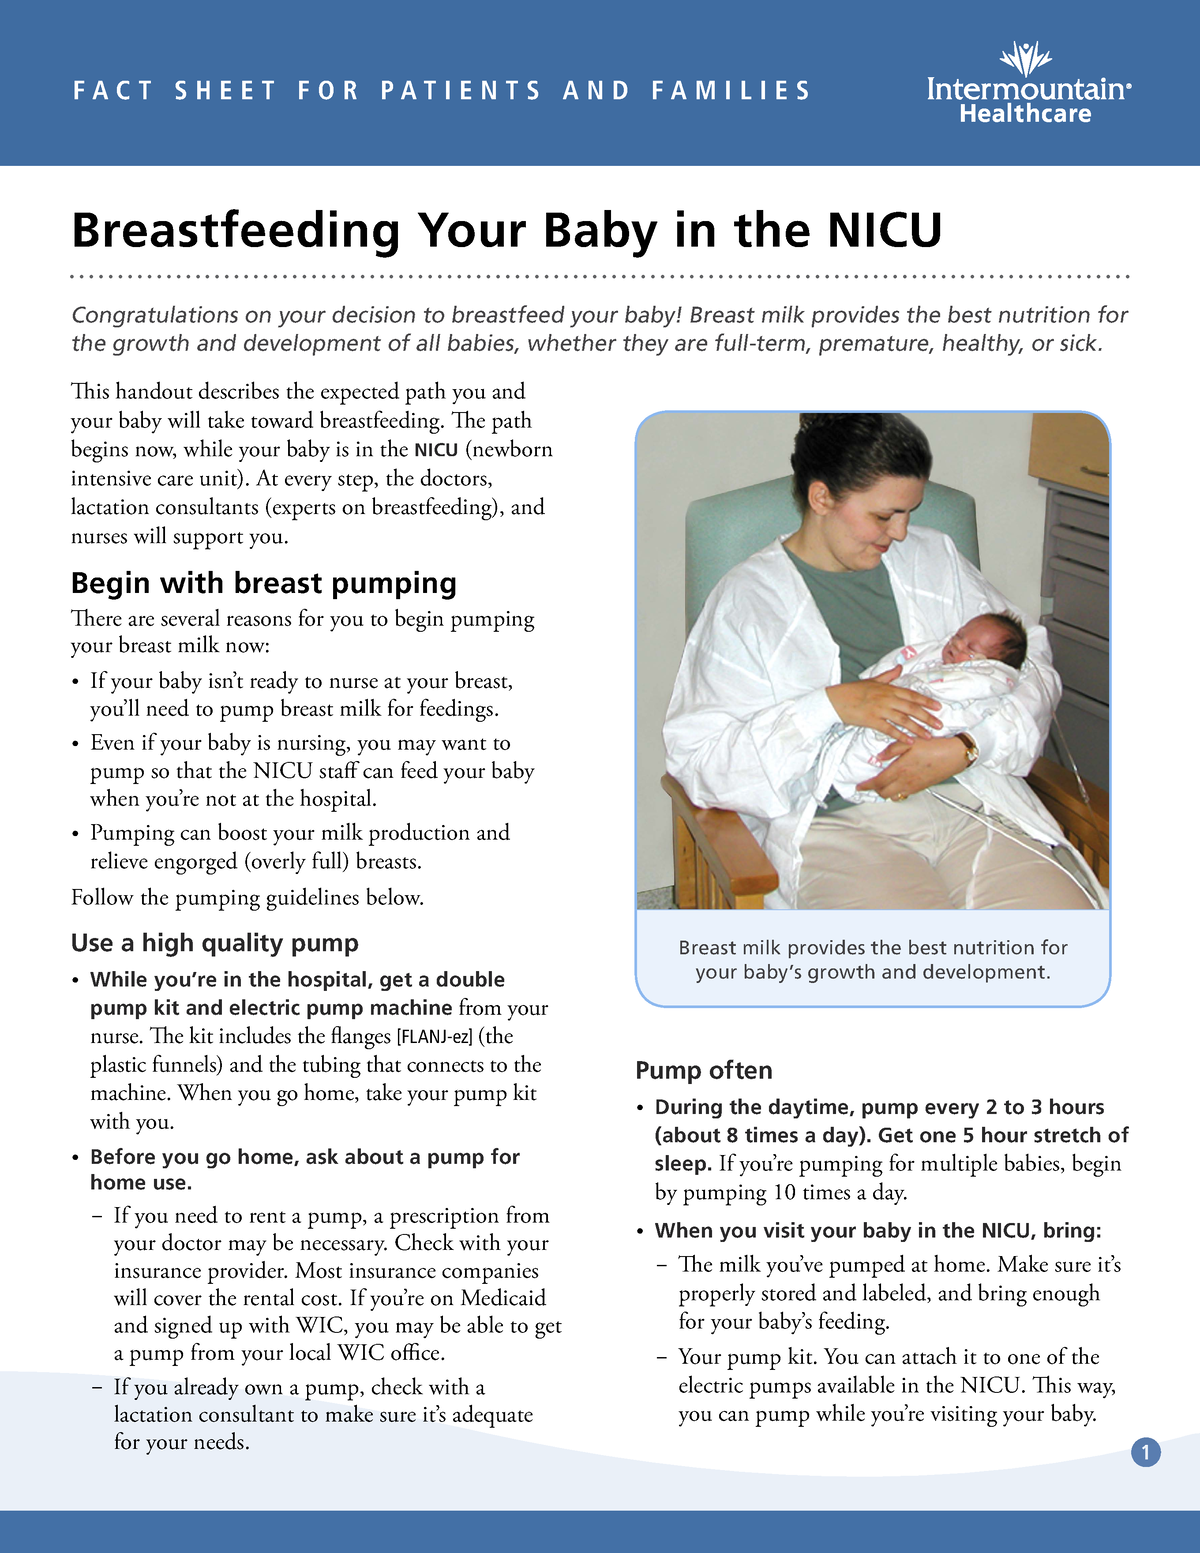 Breastfeeding Your Baby In The NICU Fact Sheet - F A C T S H E E T F O ...